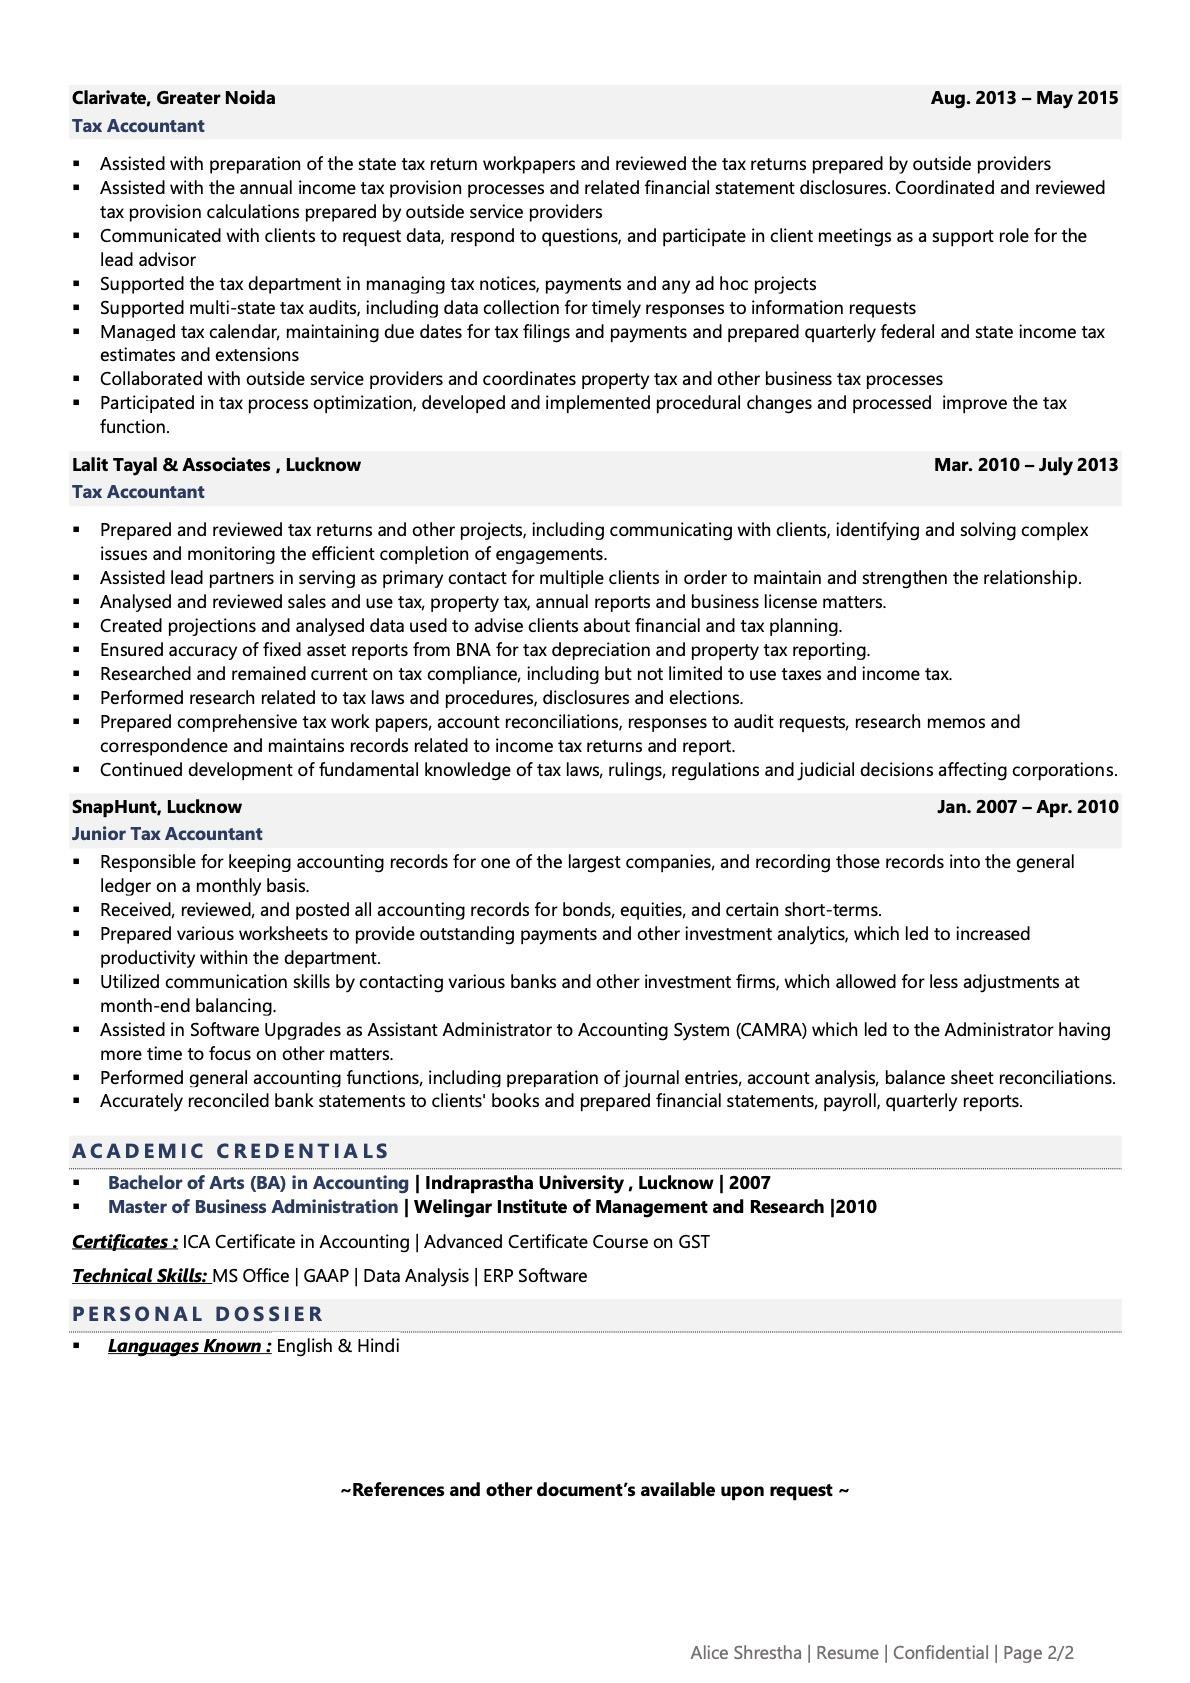 Sample Resume for Accountant Preparing Workpapers Tax Accountant Resume Examples & Template (with Job Winning Tips)